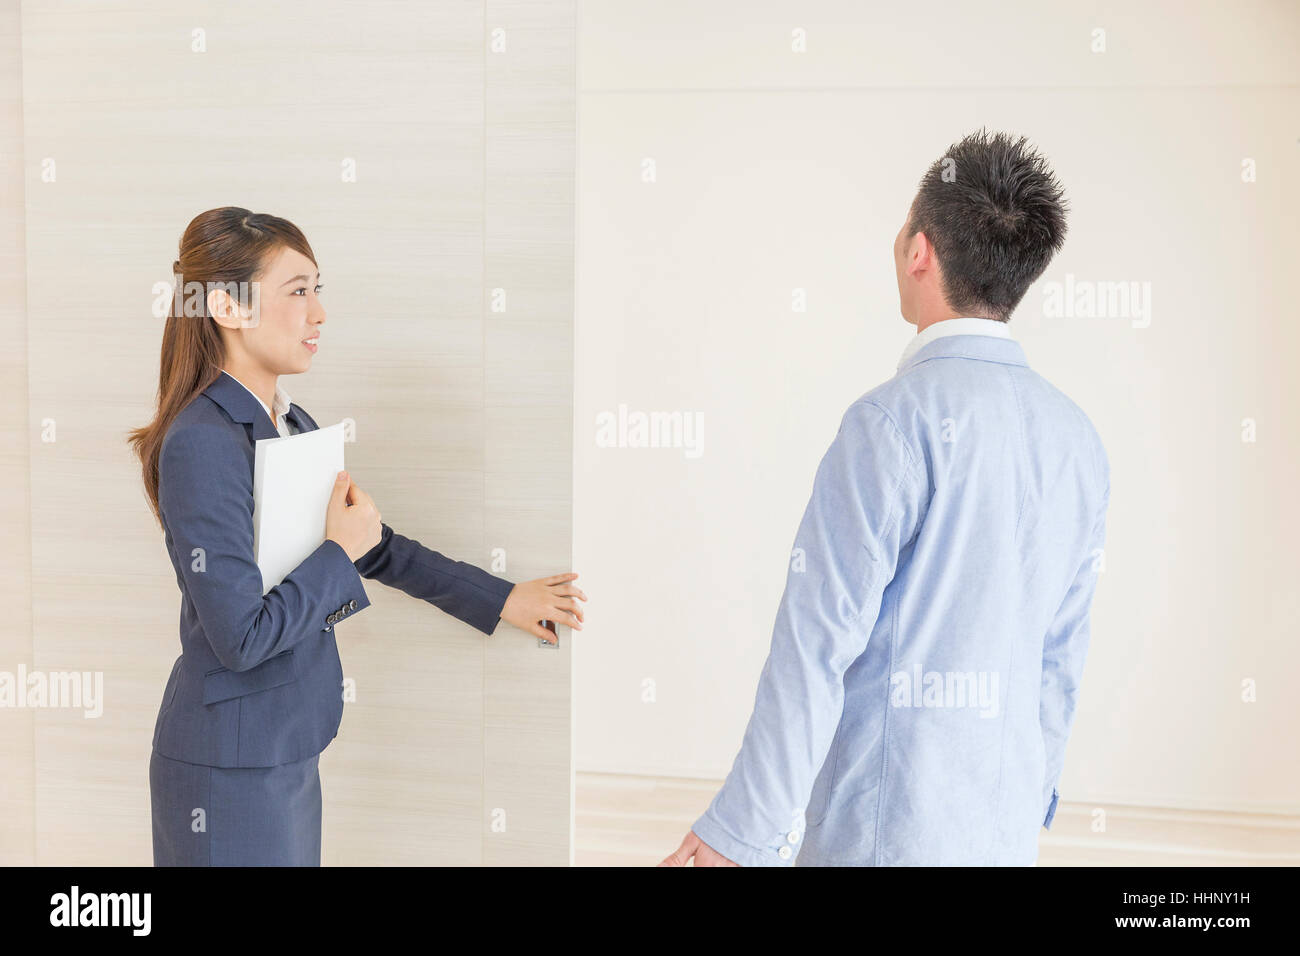 Real Estate Agent Showing Room to Buyer Stock Photo